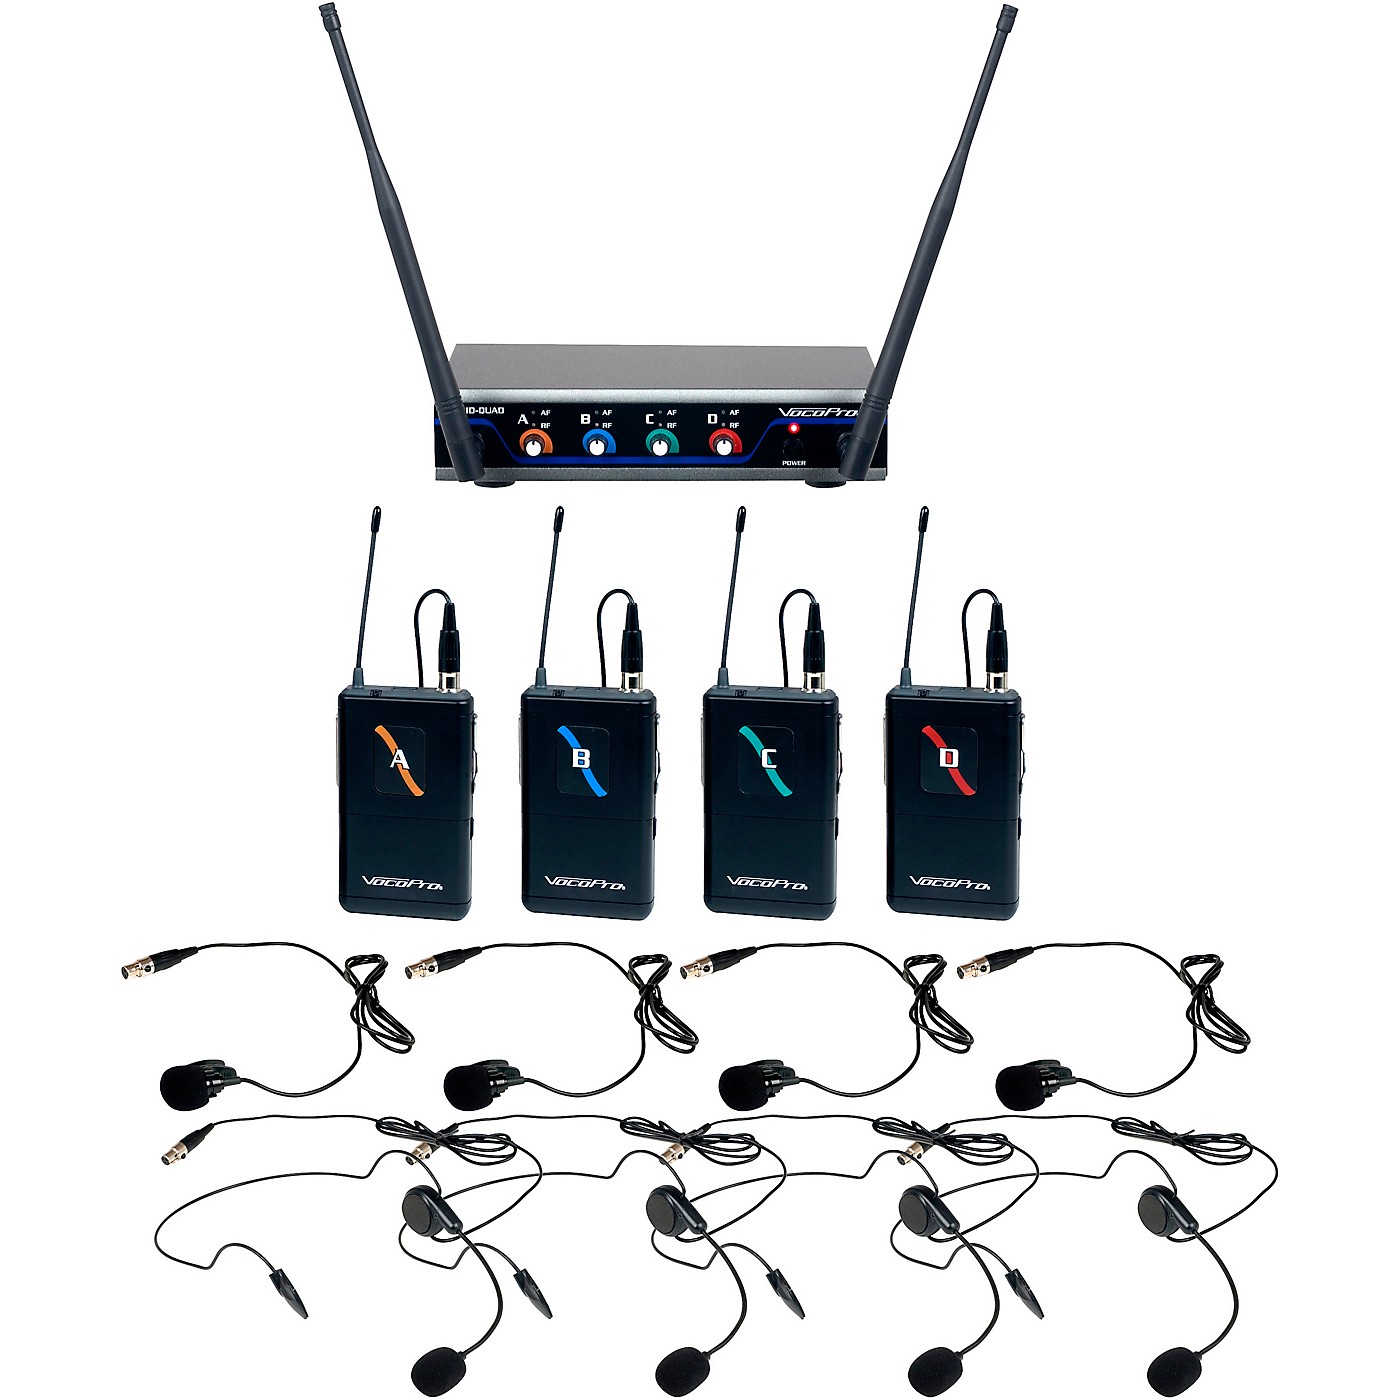 VocoPro Digital-Quad-B3 Four-Channel UHF Digital Wireless Headset & Lapel Microphone - Frequency 902MHz-927.2MHz thumbnail